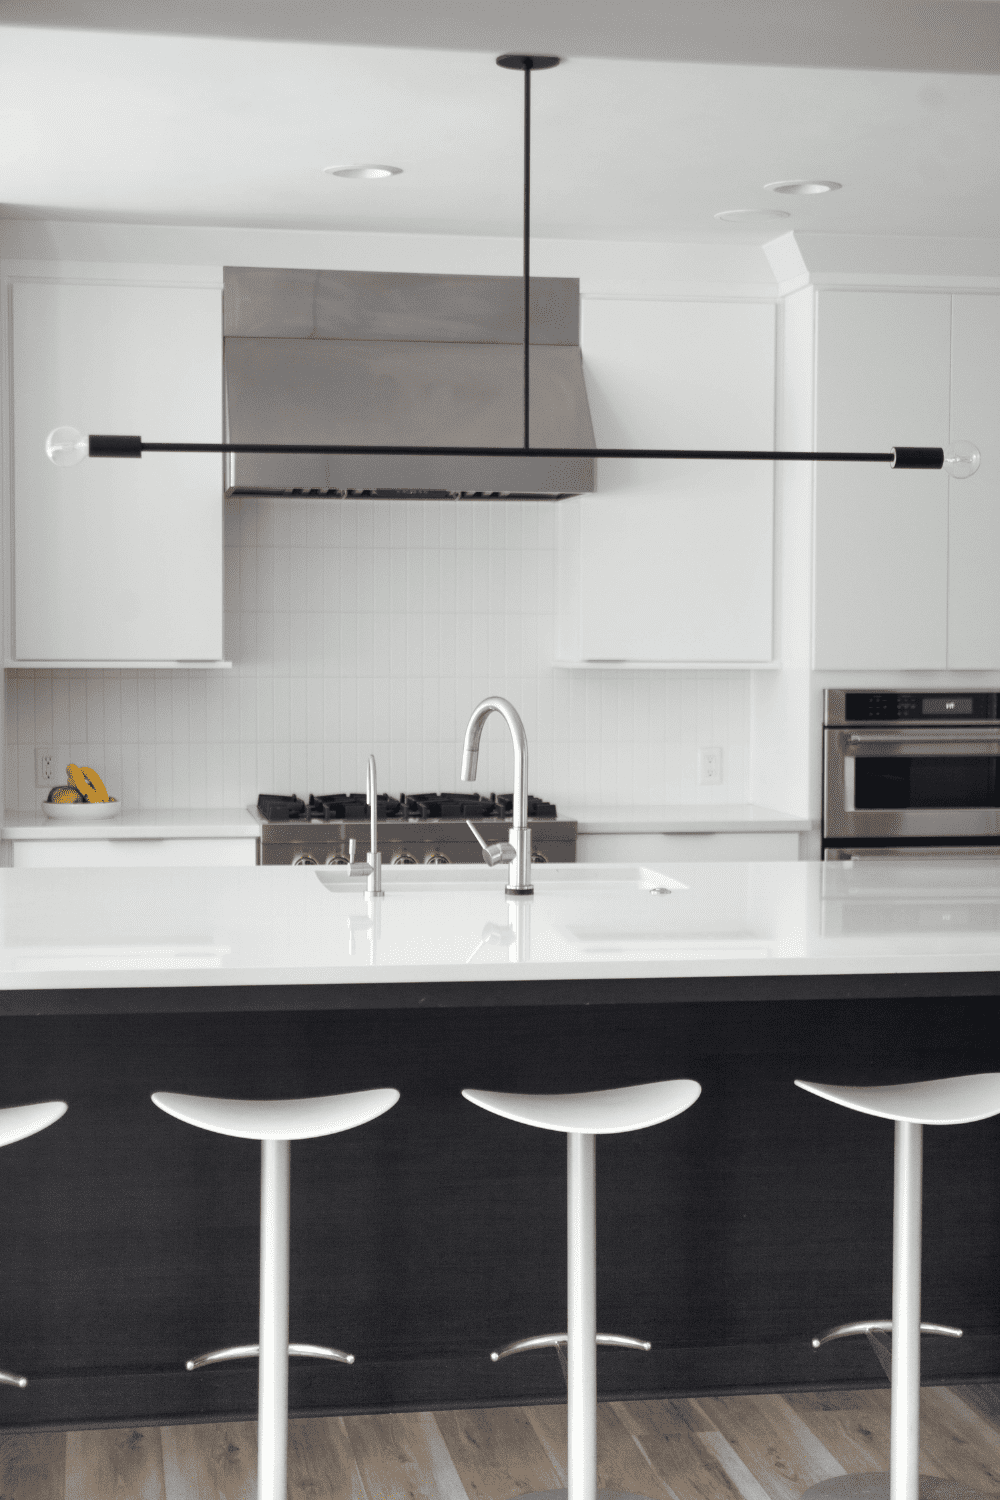 Nicholas Design Build | A black and white kitchen with stools.